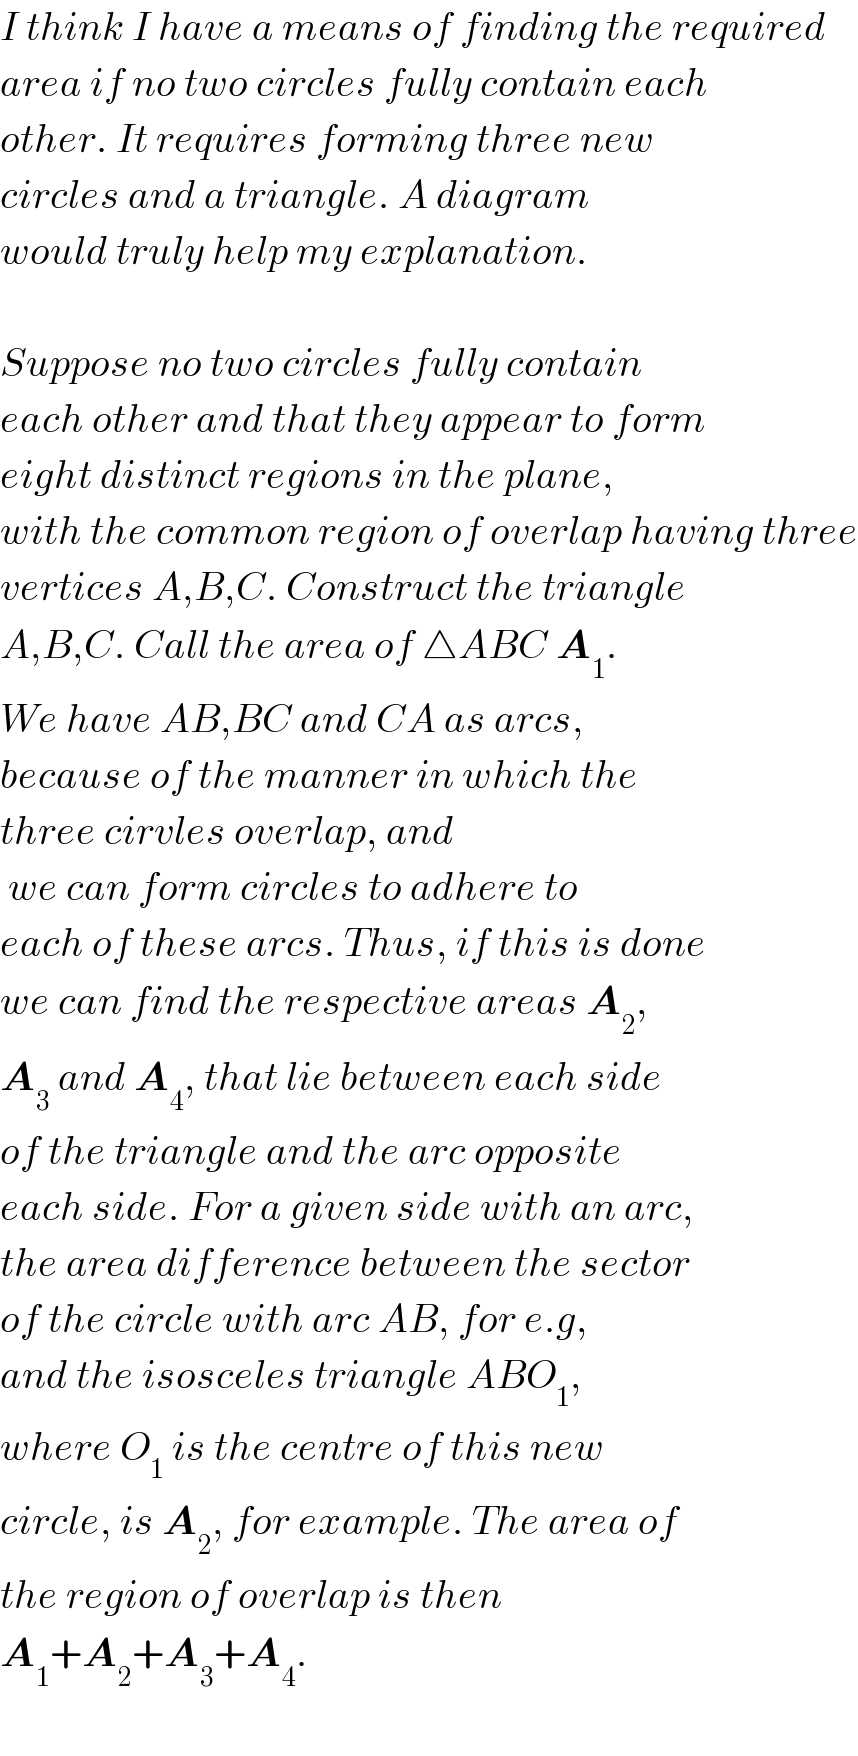 I think I have a means of finding the required  area if no two circles fully contain each   other. It requires forming three new  circles and a triangle. A diagram   would truly help my explanation.     Suppose no two circles fully contain  each other and that they appear to form  eight distinct regions in the plane,  with the common region of overlap having three  vertices A,B,C. Construct the triangle  A,B,C. Call the area of △ABC A_1 .  We have AB,BC and CA as arcs,  because of the manner in which the  three cirvles overlap, and   we can form circles to adhere to  each of these arcs. Thus, if this is done  we can find the respective areas A_2 ,  A_3  and A_4 , that lie between each side  of the triangle and the arc opposite   each side. For a given side with an arc,  the area difference between the sector  of the circle with arc AB, for e.g,   and the isosceles triangle ABO_1 ,  where O_1  is the centre of this new   circle, is A_2 , for example. The area of  the region of overlap is then   A_1 +A_2 +A_3 +A_4 .     